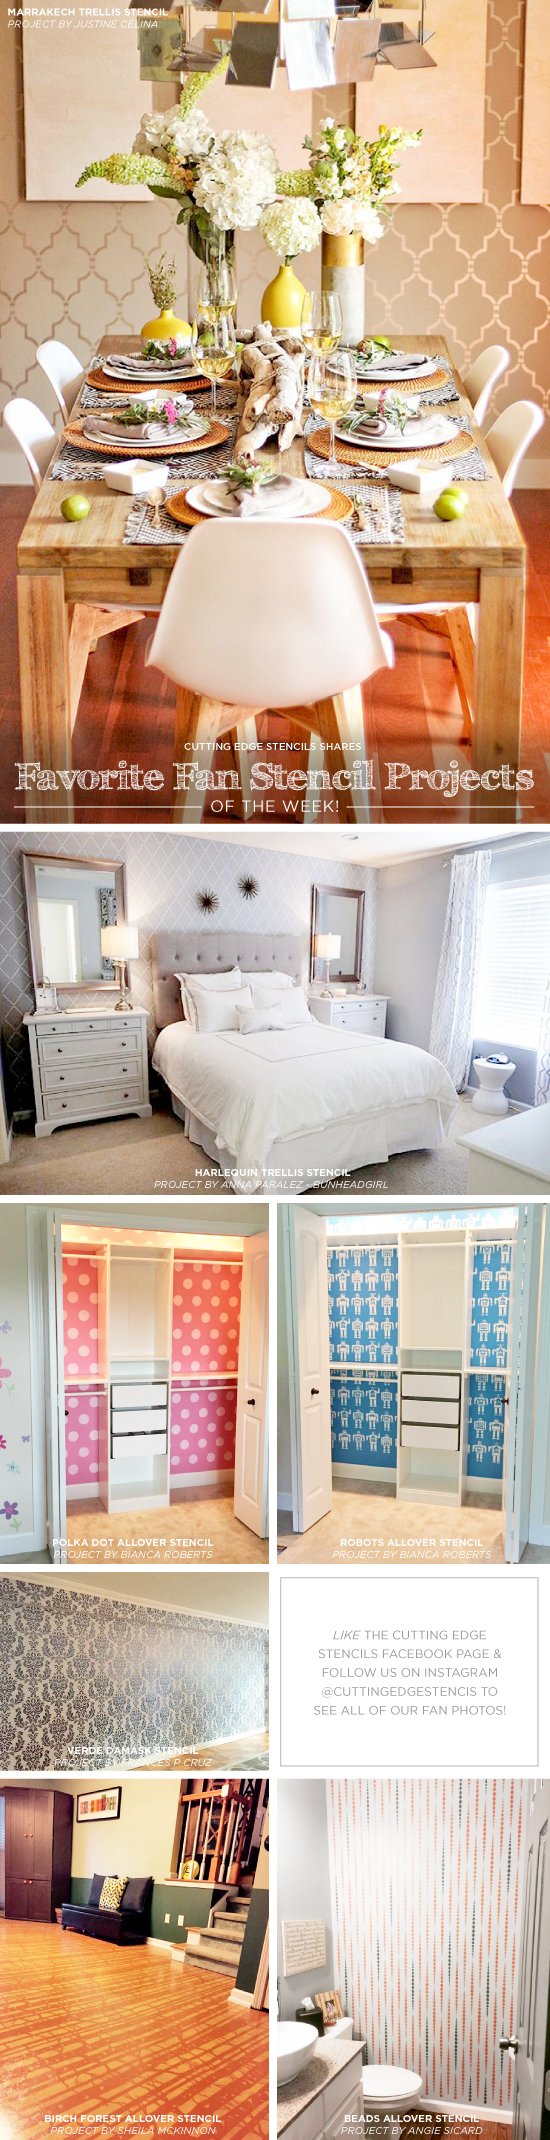 Cutting Edge Stencils shares DIY stenciled room ideas and accent wall projects. http://www.cuttingedgestencils.com/wall-stencils-stencil-designs.html